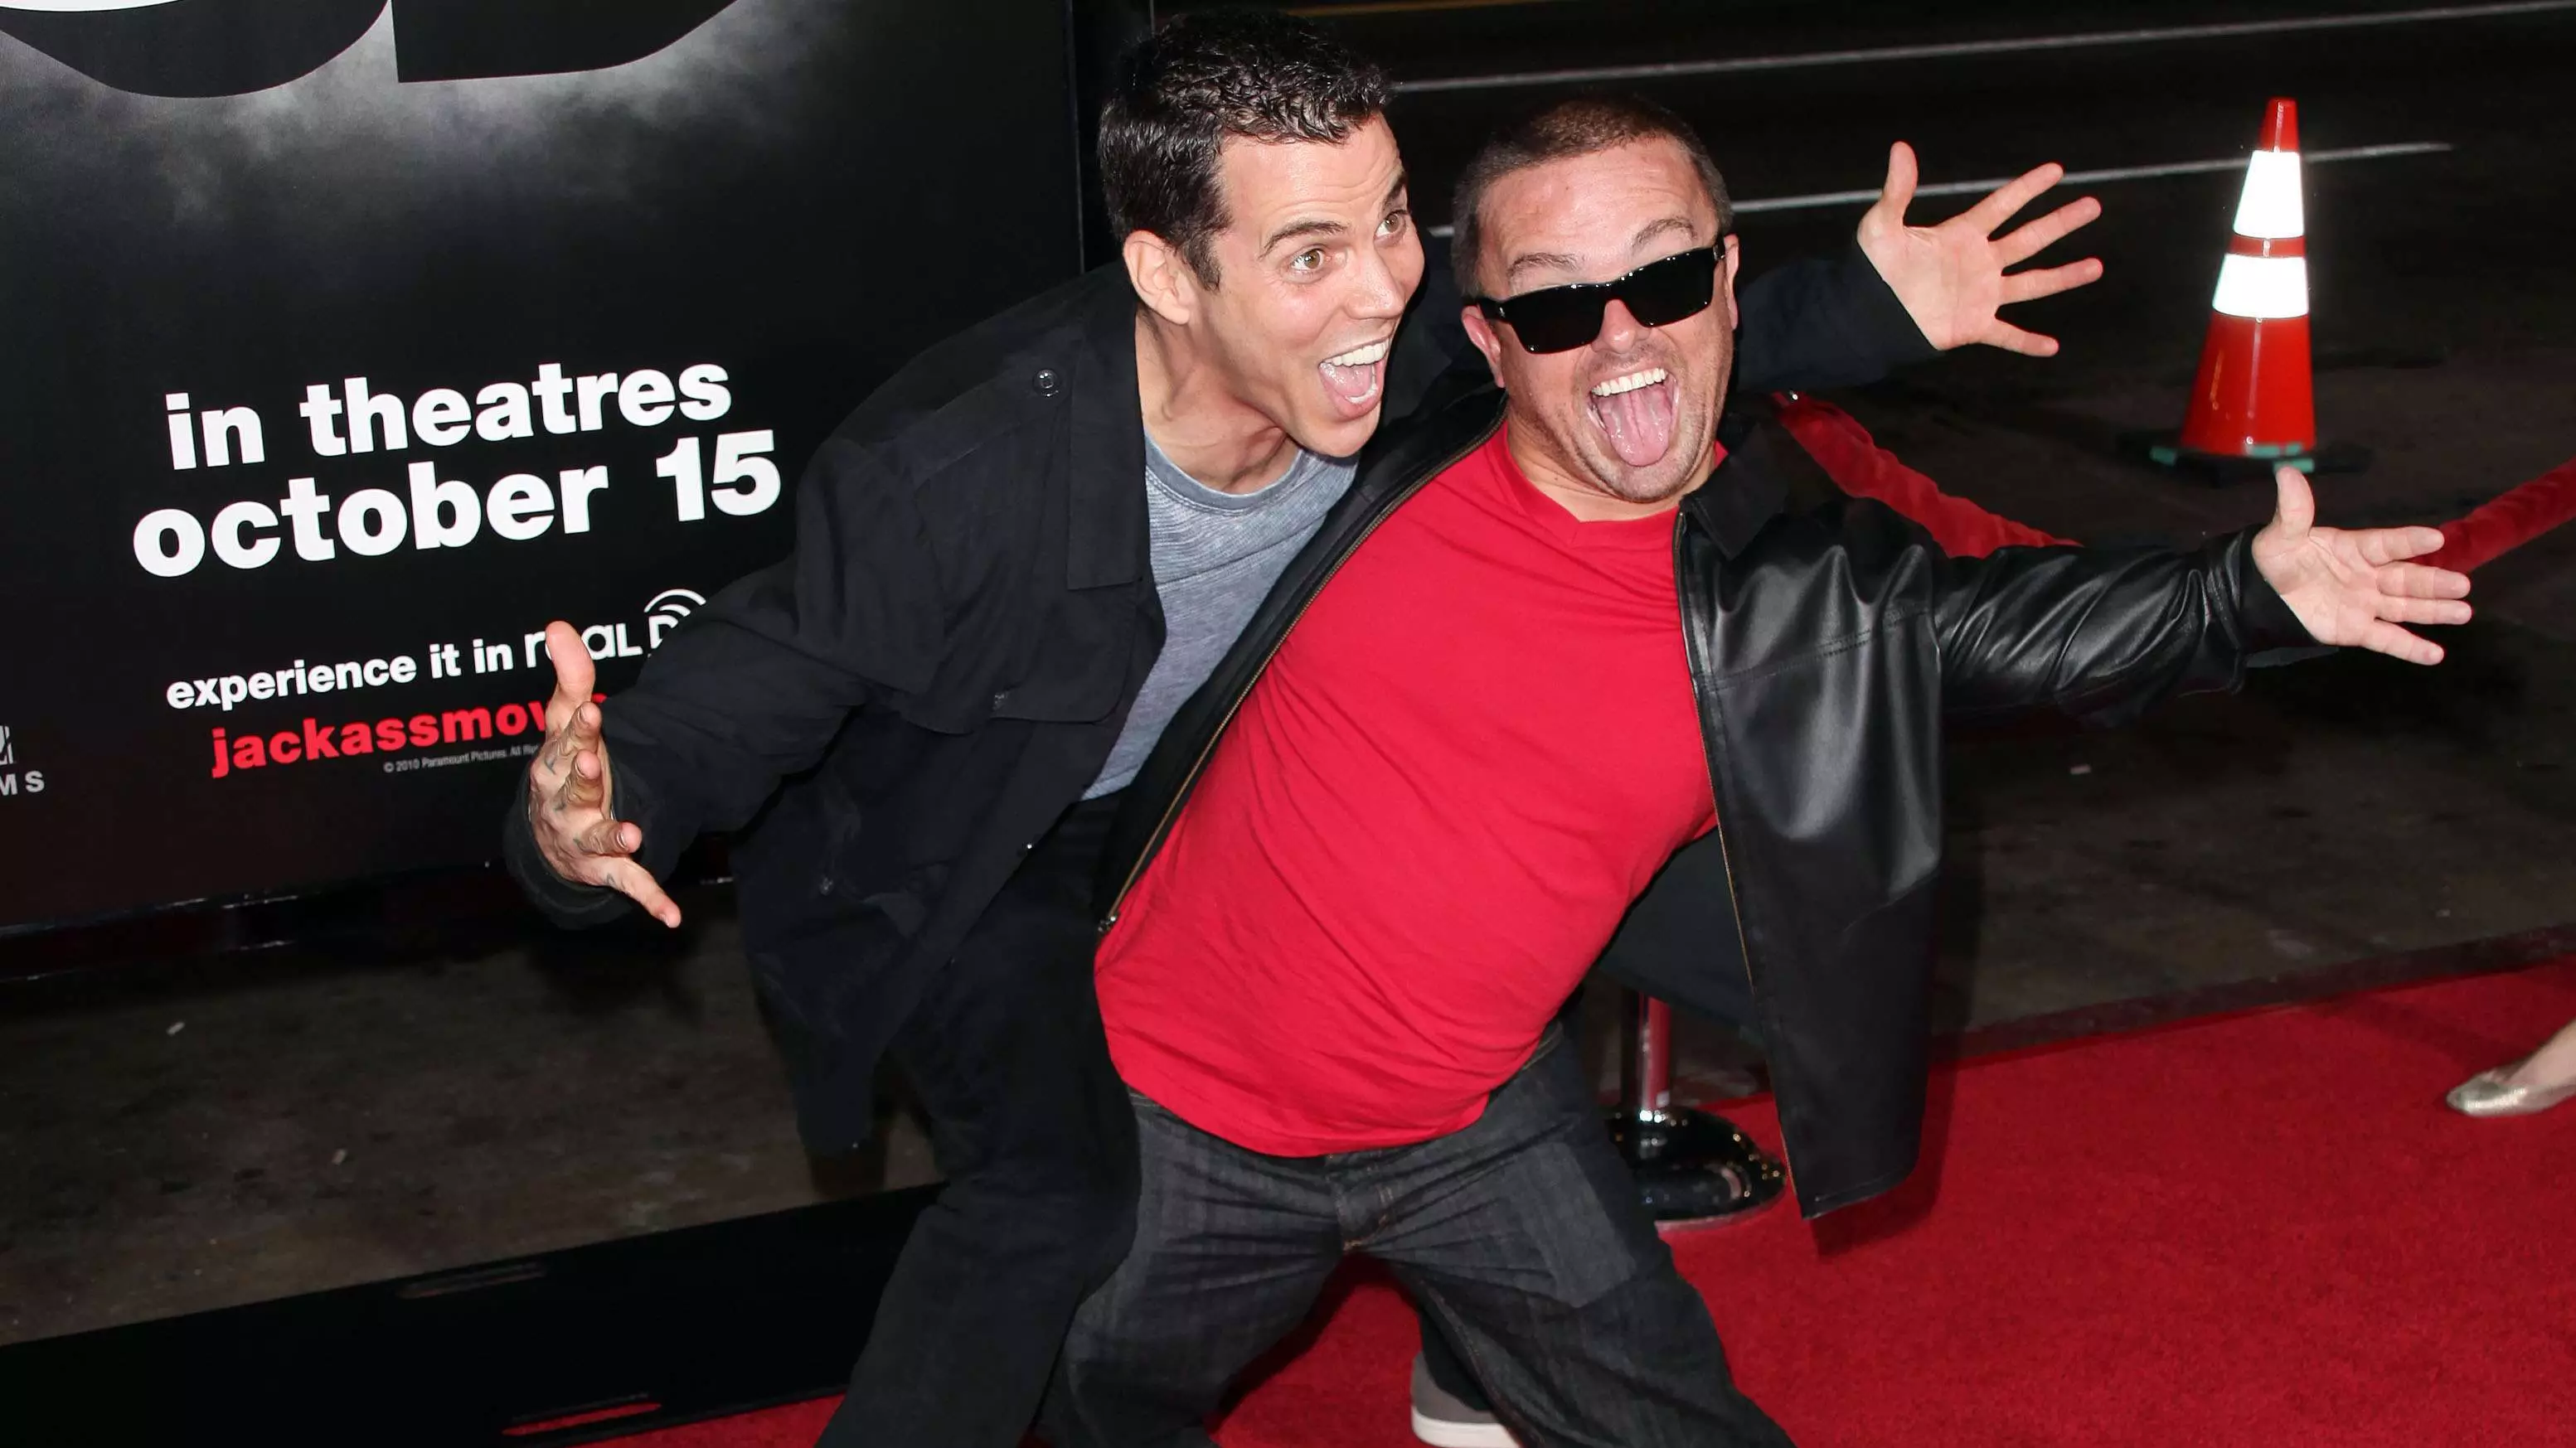 Steve-O And Wee-Man Discuss Their Biggest Jackass Career Regrets